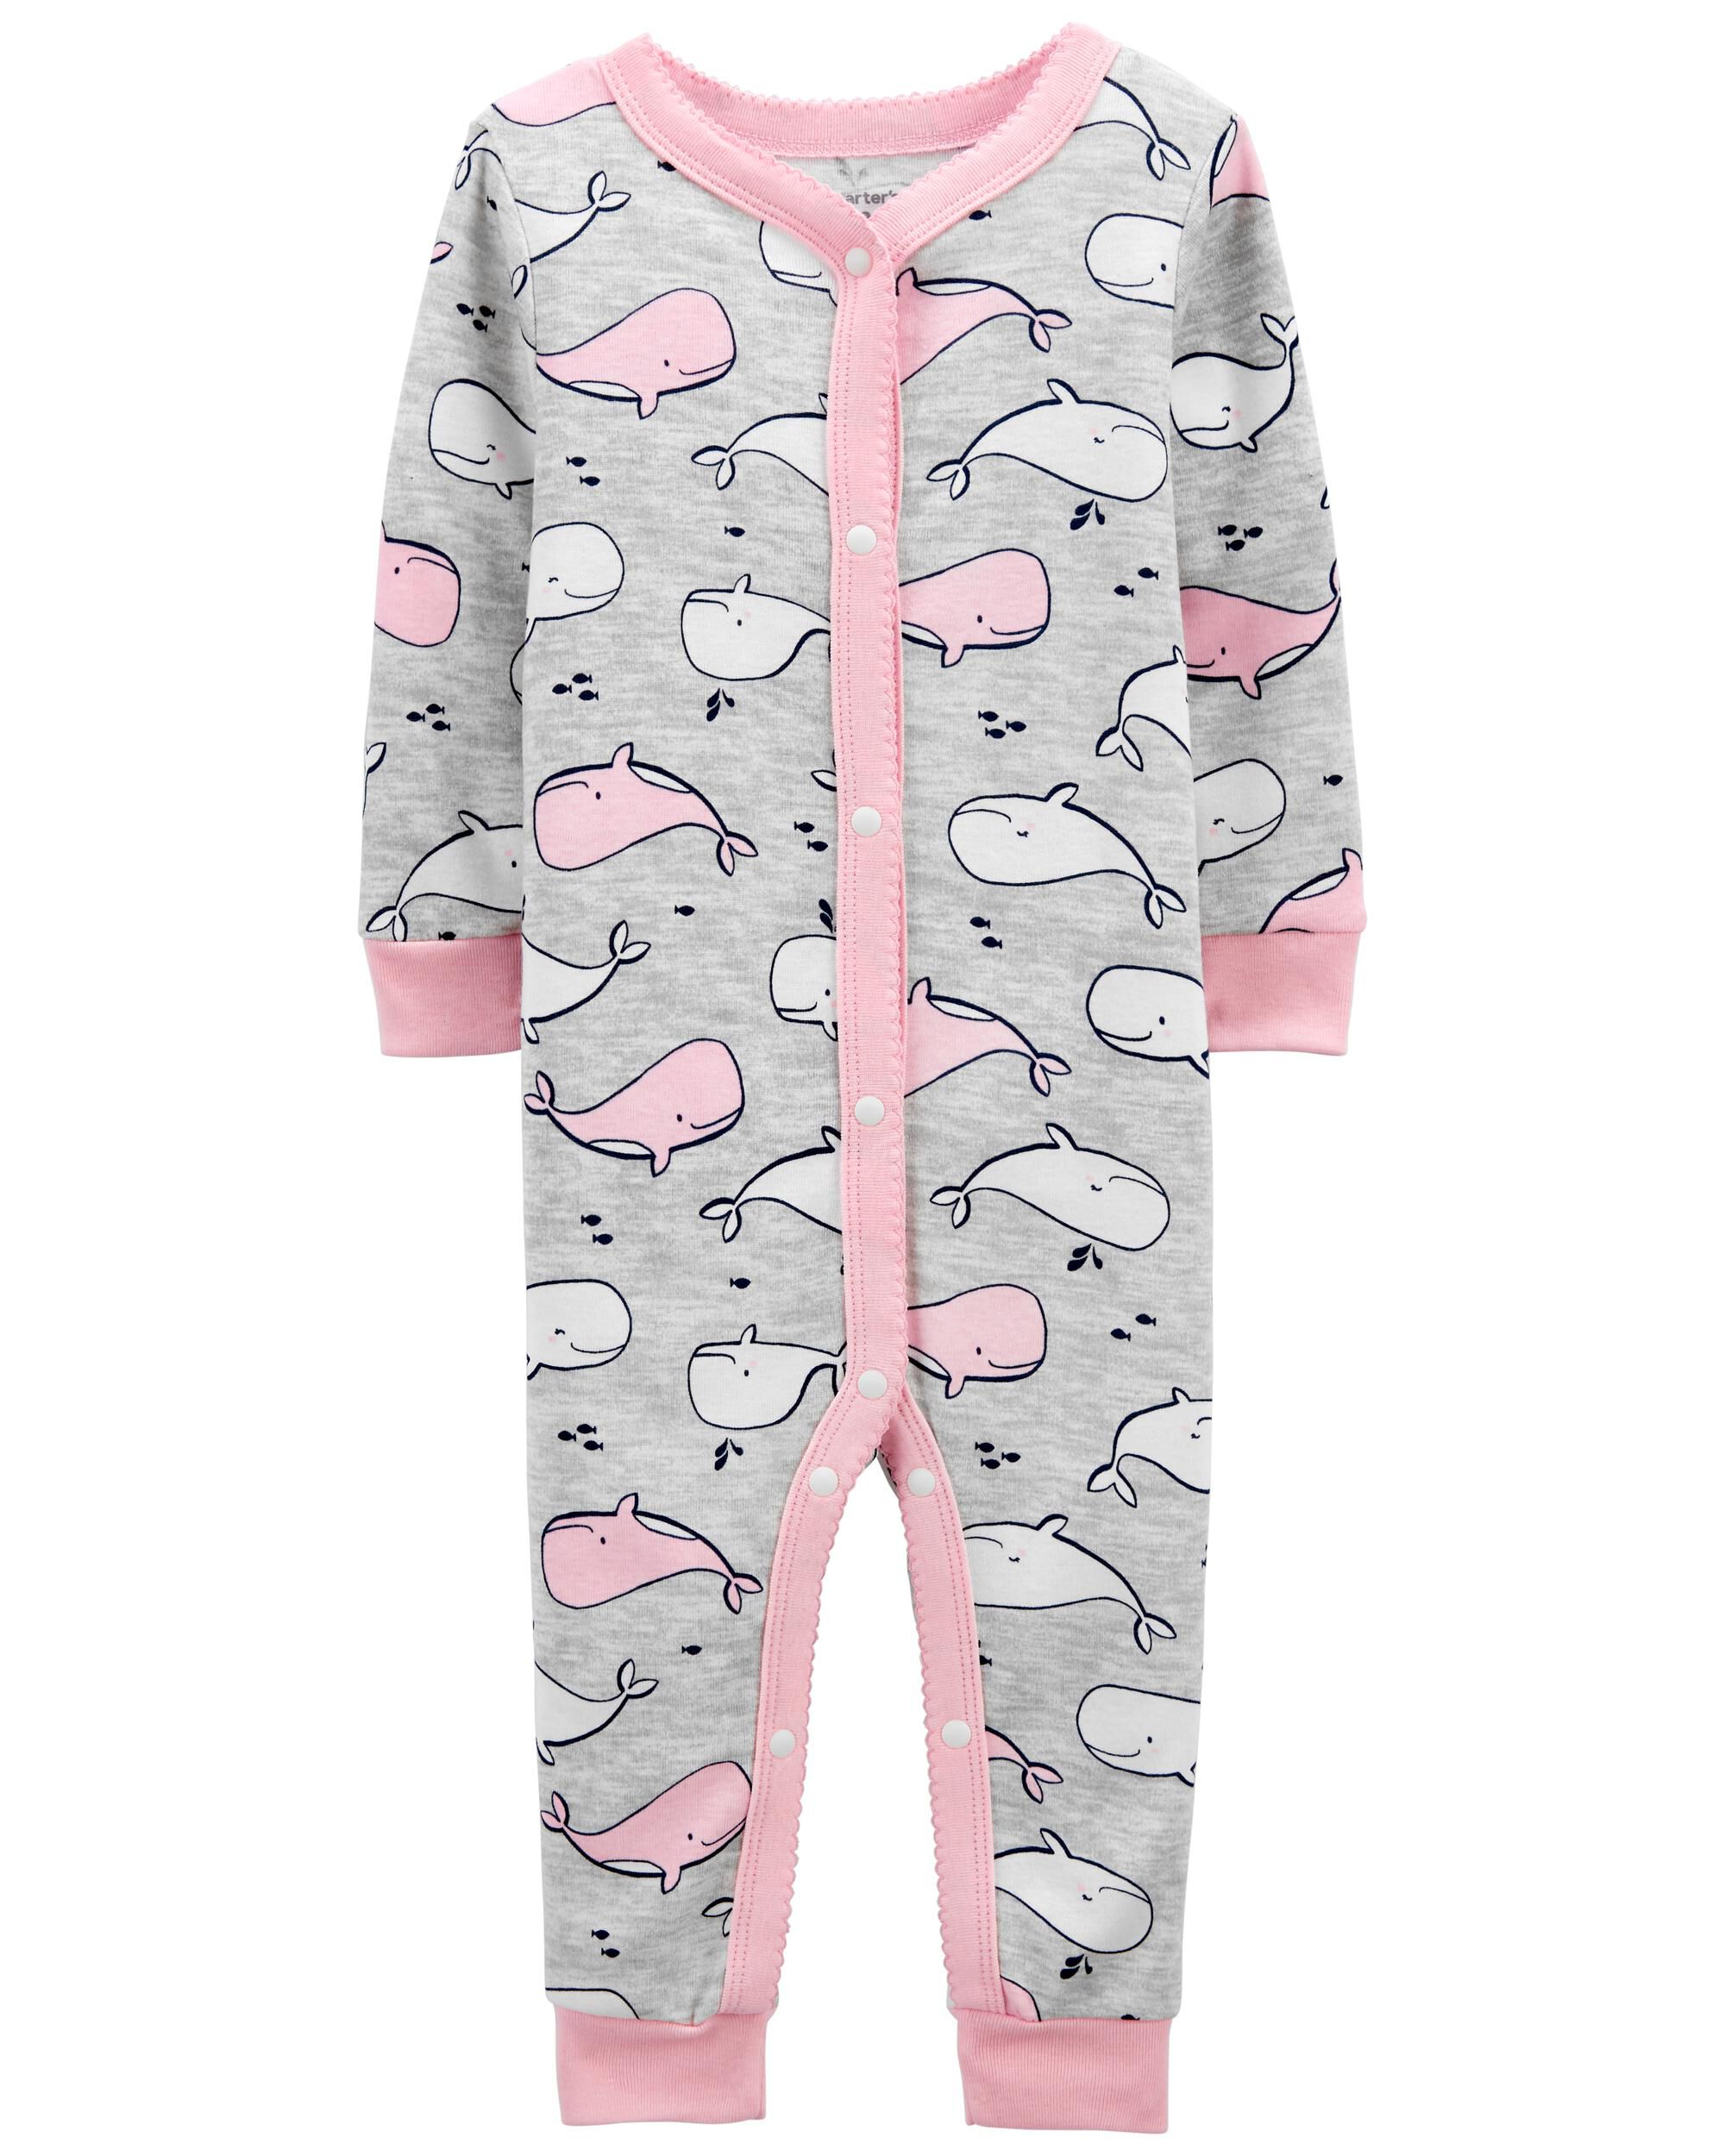 New Carter's 1-Piece Whale Snug Fit Cotton Footless Pajama PJs Girl Sleeper 